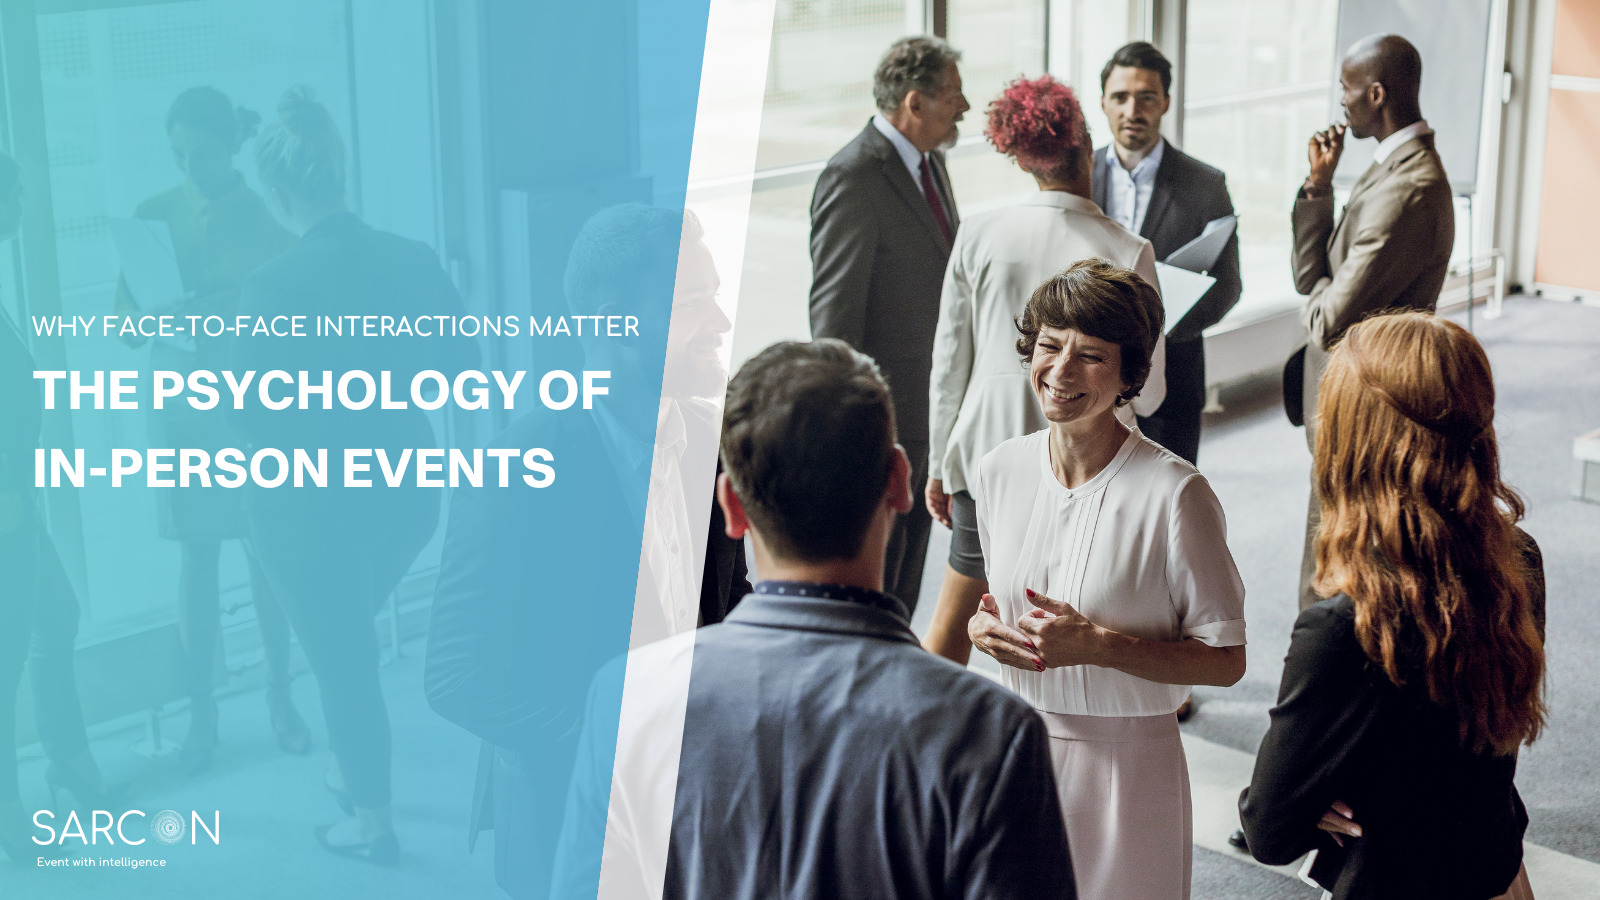 The Psychology of In-Person Events: Why Face-to-Face Interactions Matter